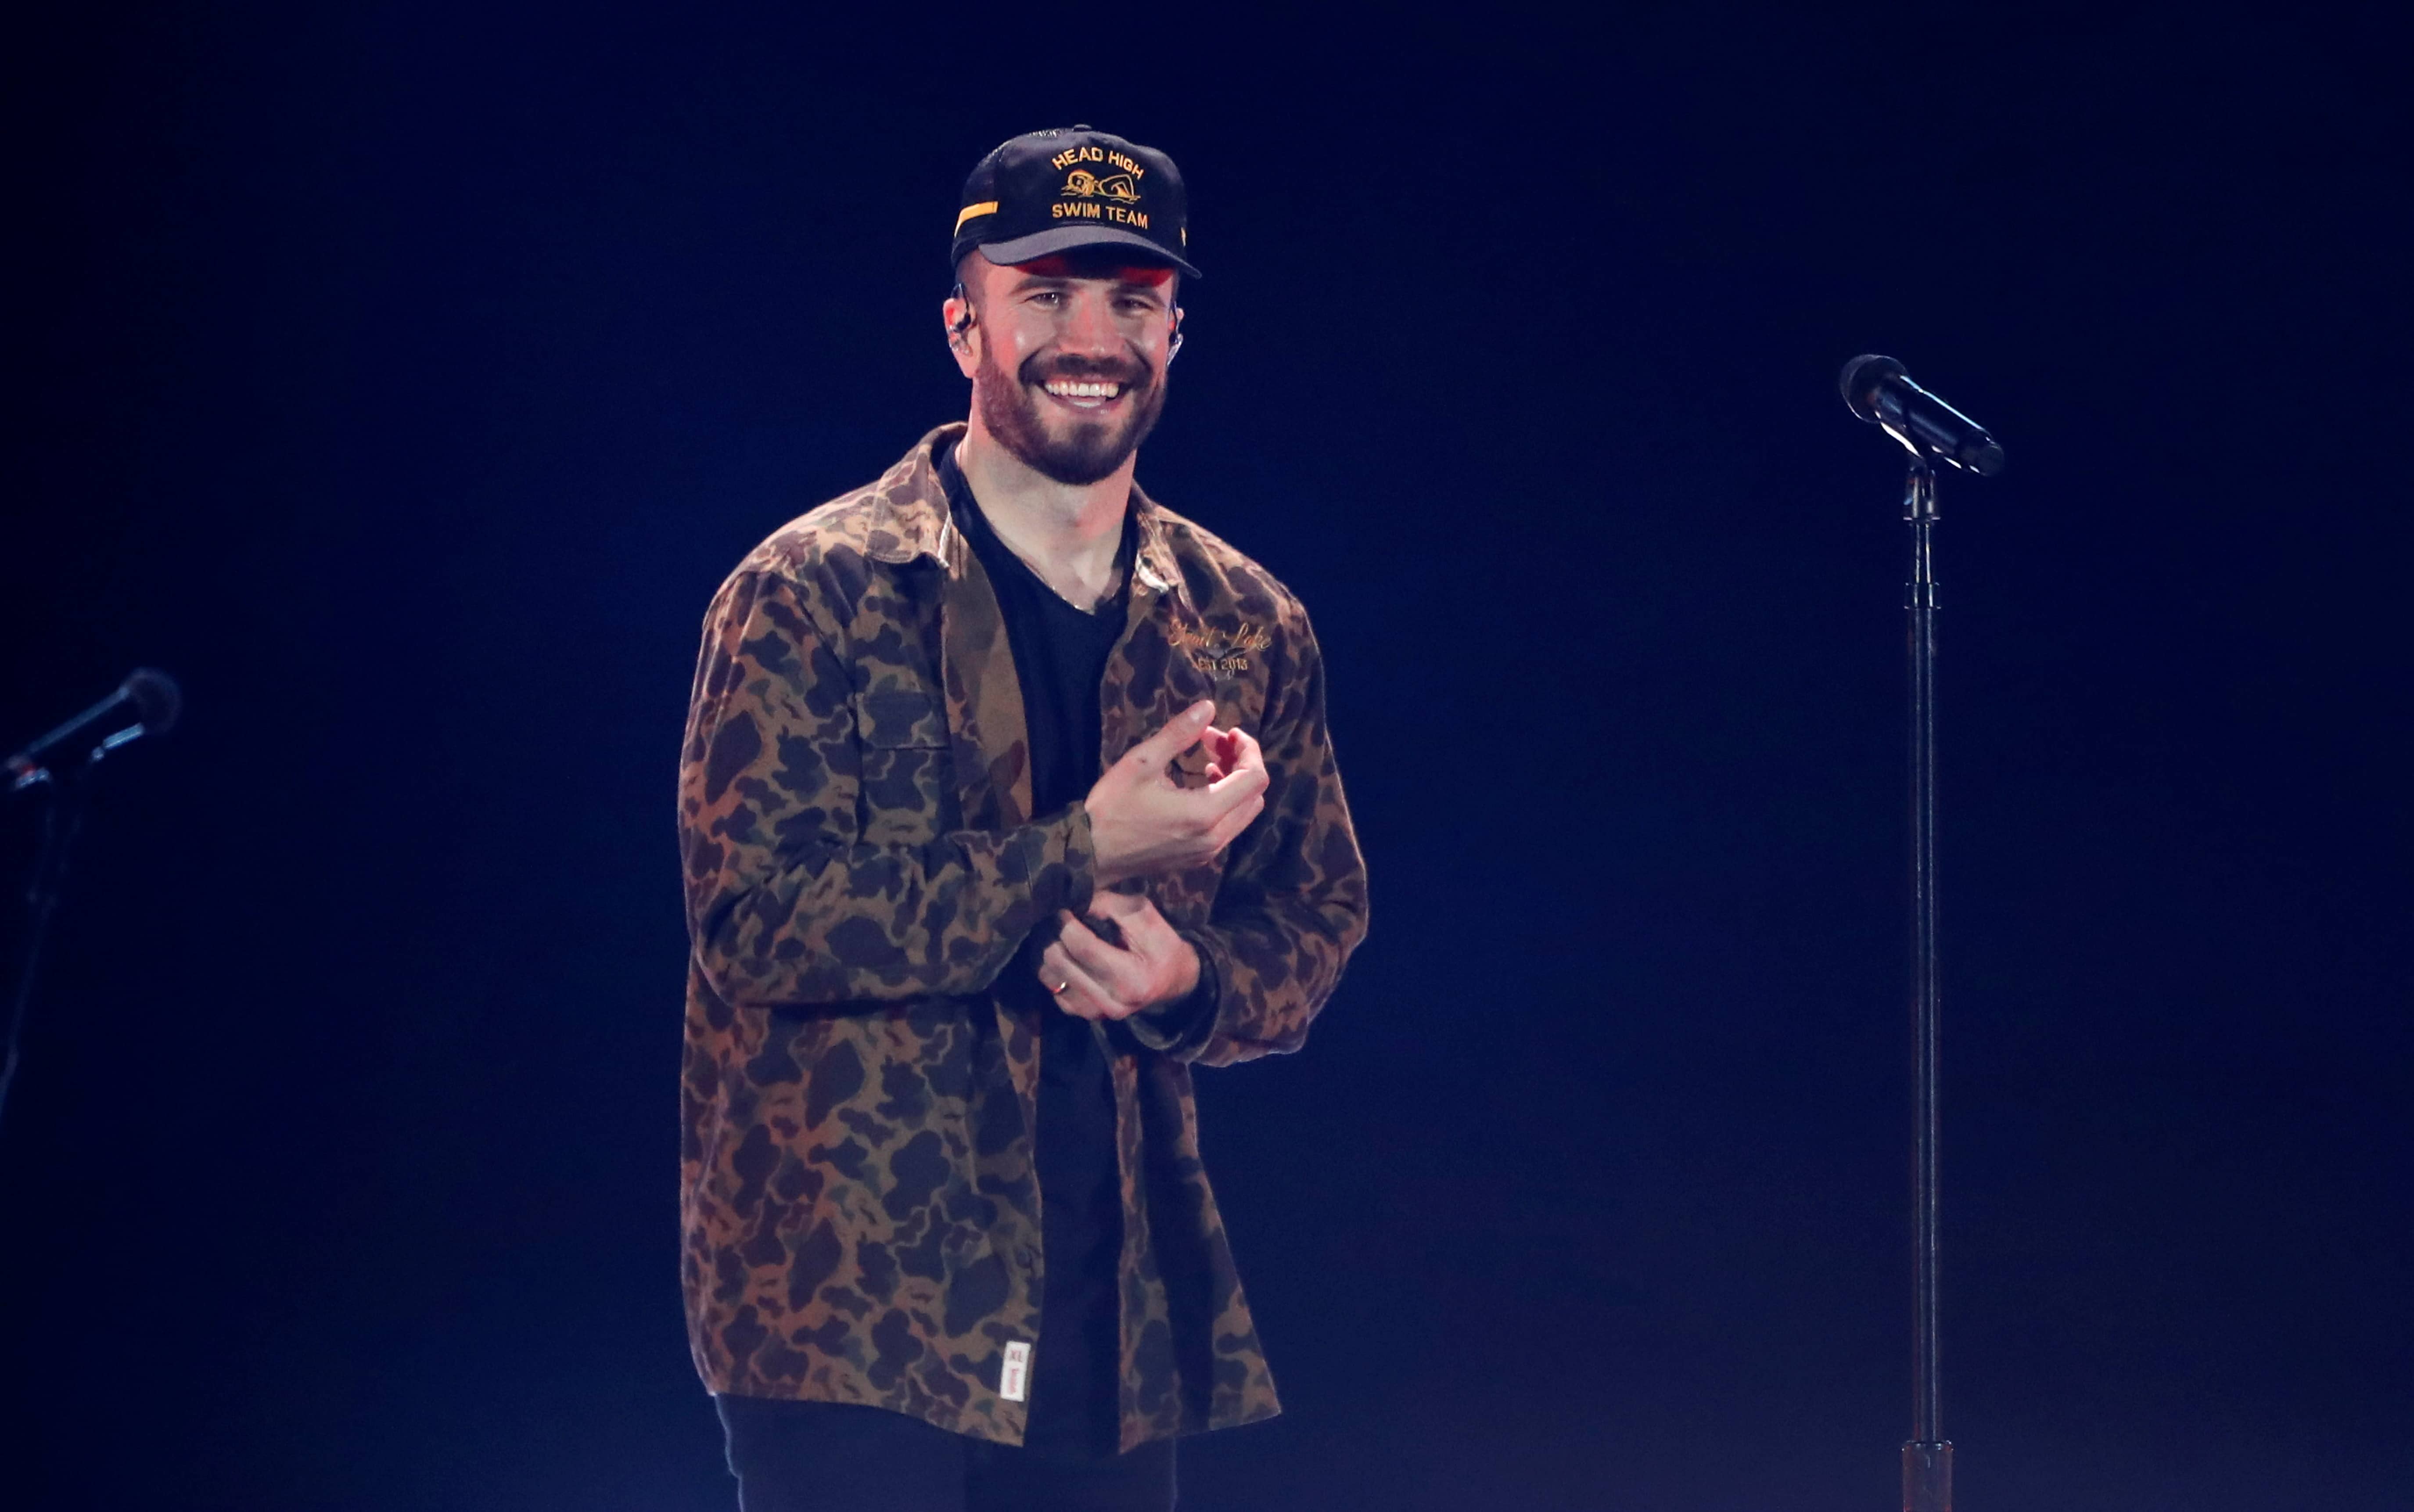 sam-hunt-performs-during-the-second-day-of-the-iheartradio-music-festival-at-the-t-mobile-arena-in-las-vegas